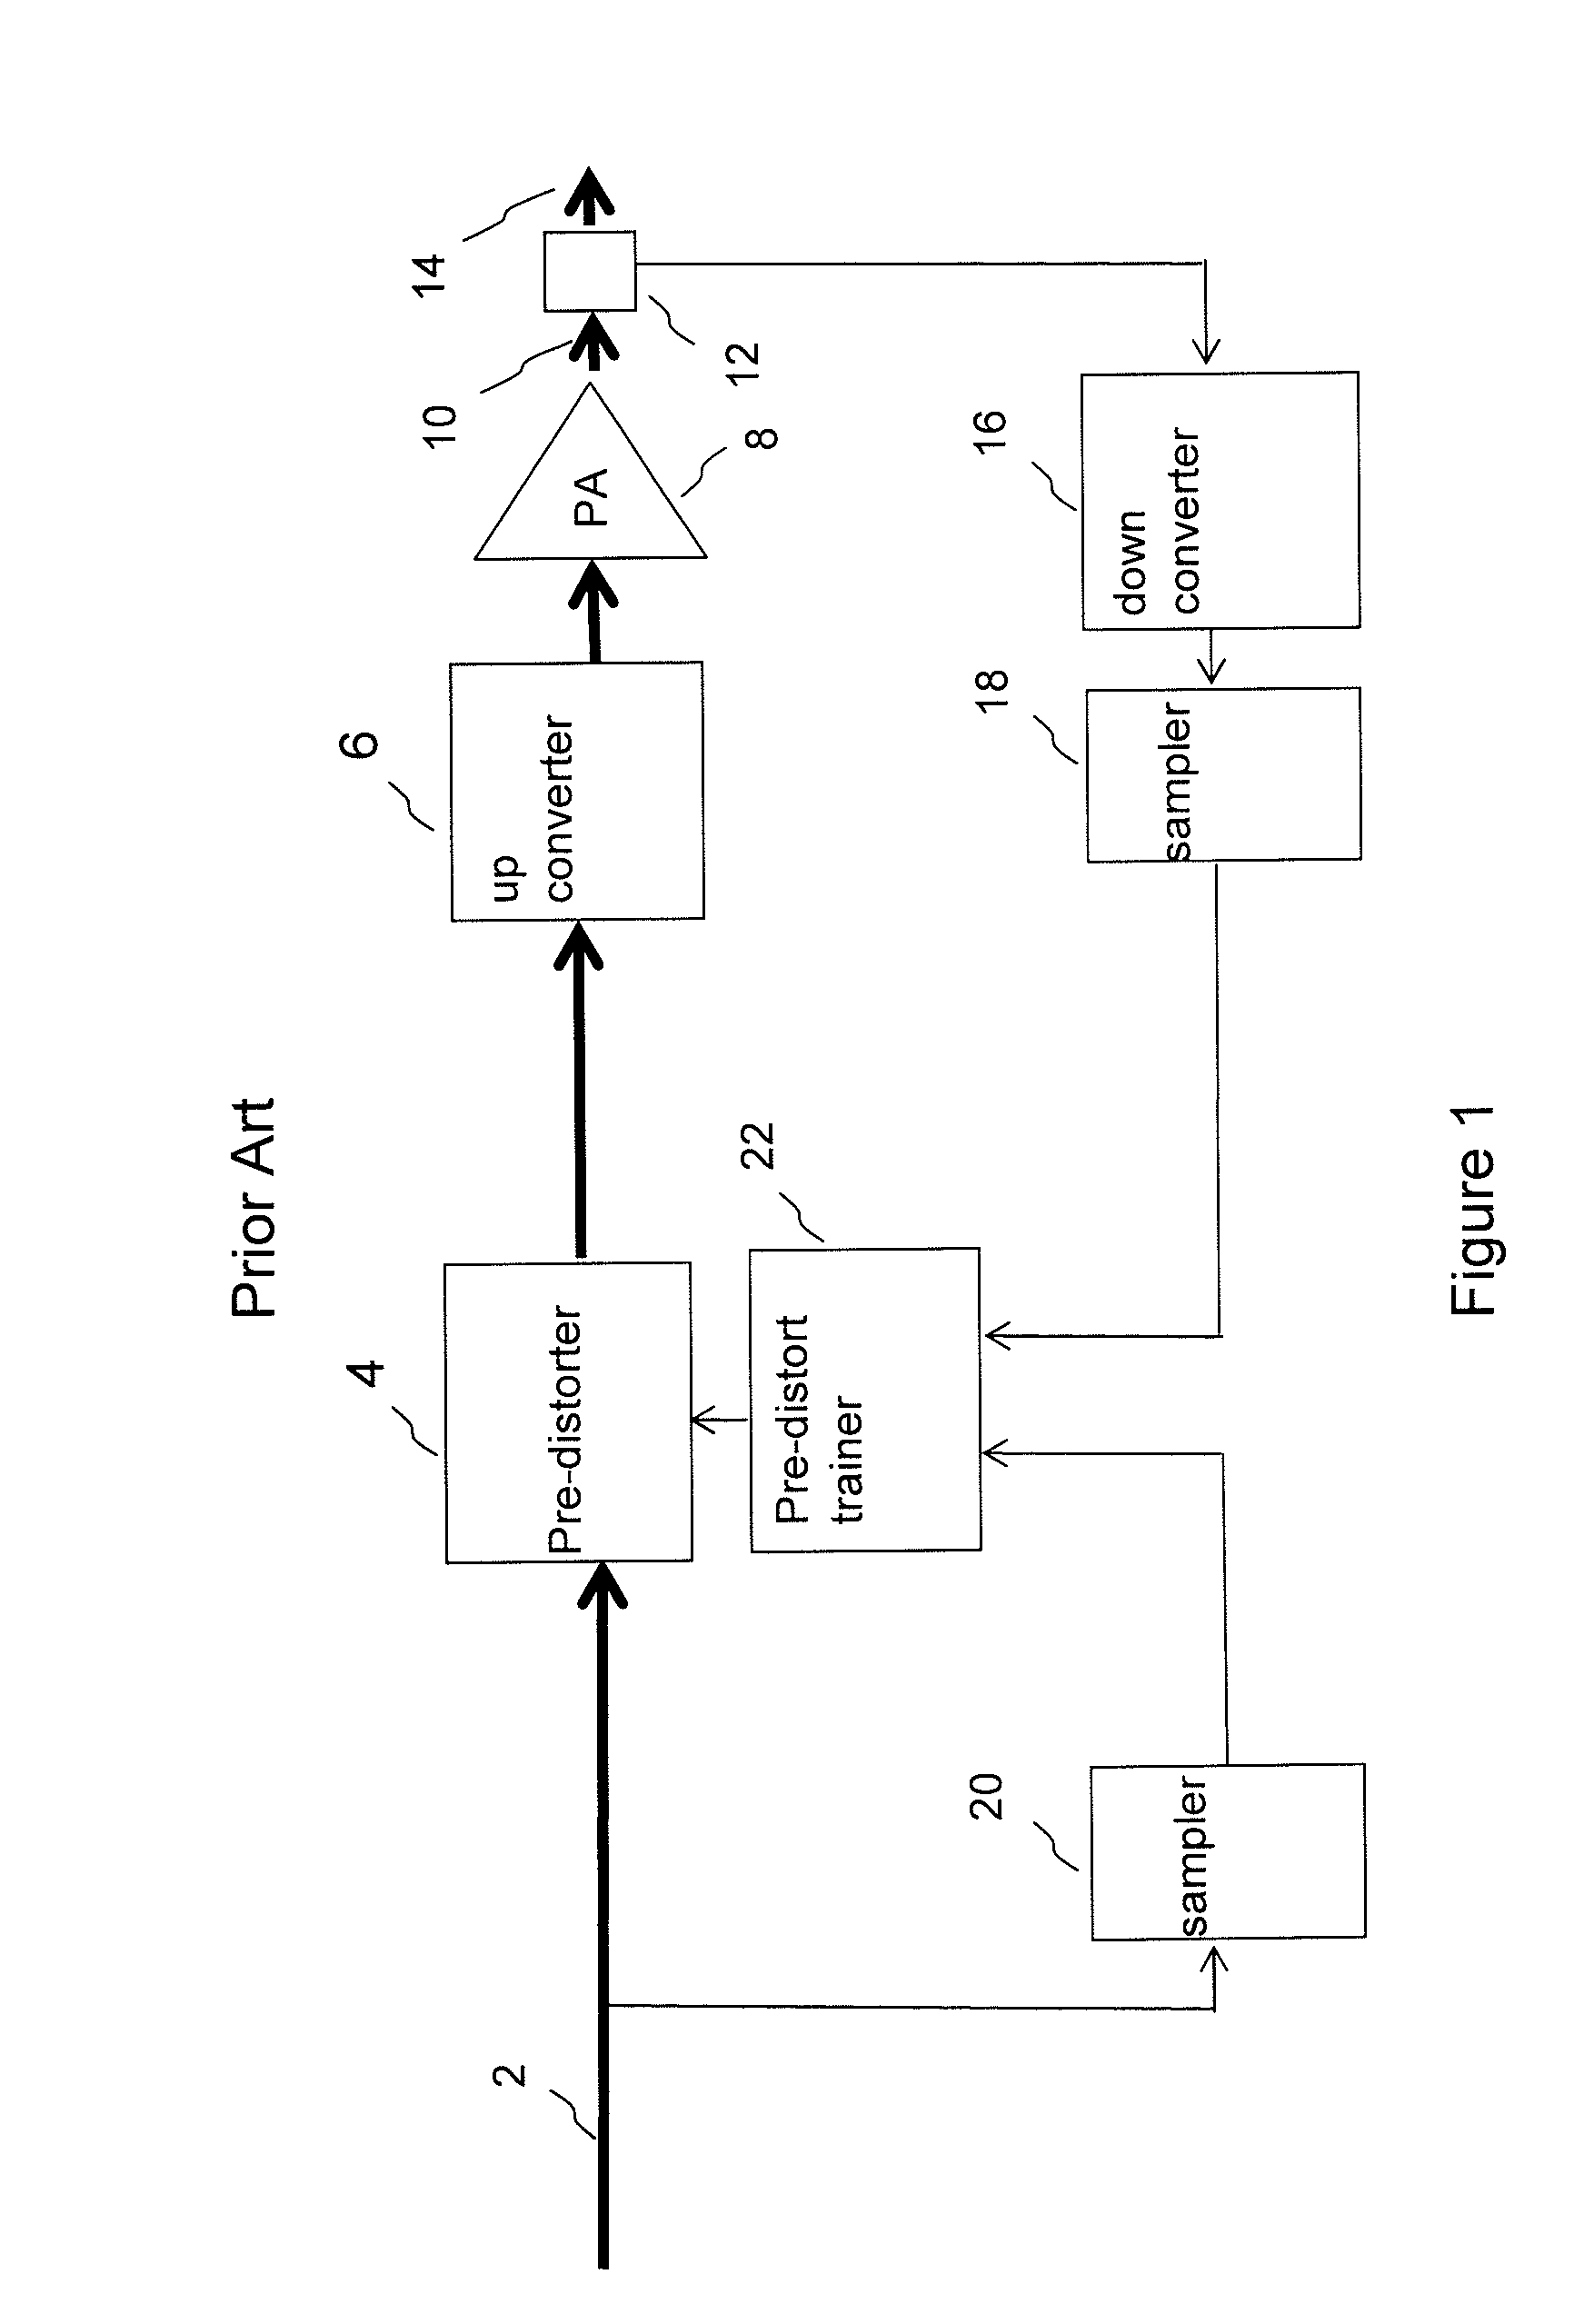 Pre-distortion for a Radio Frequency Power Amplifier